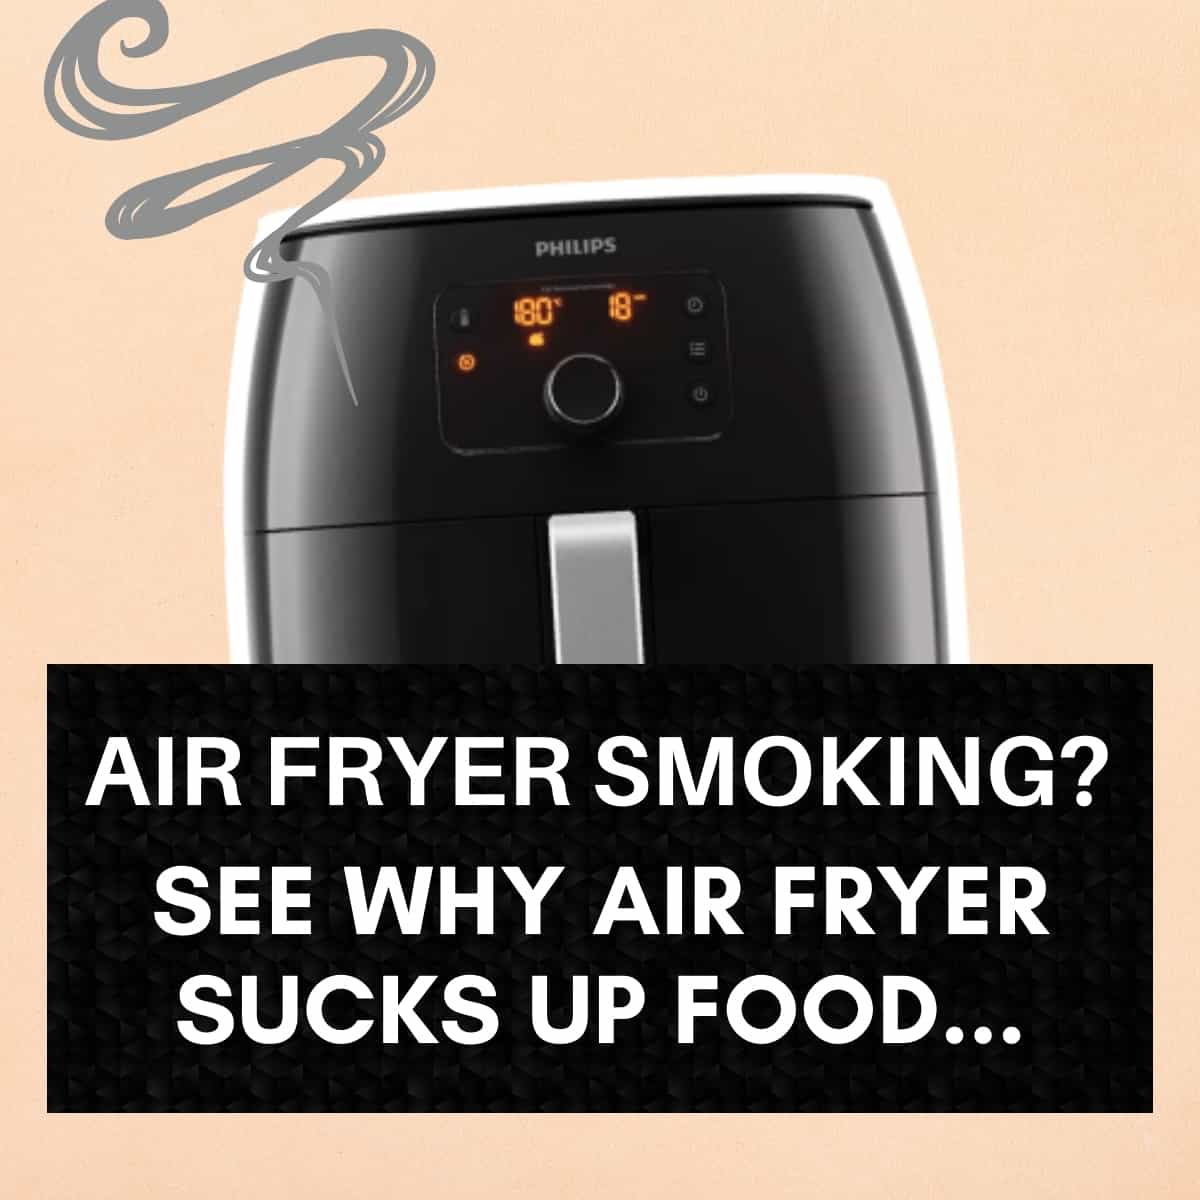 Air Fryer Smoking graphic with text overlay.